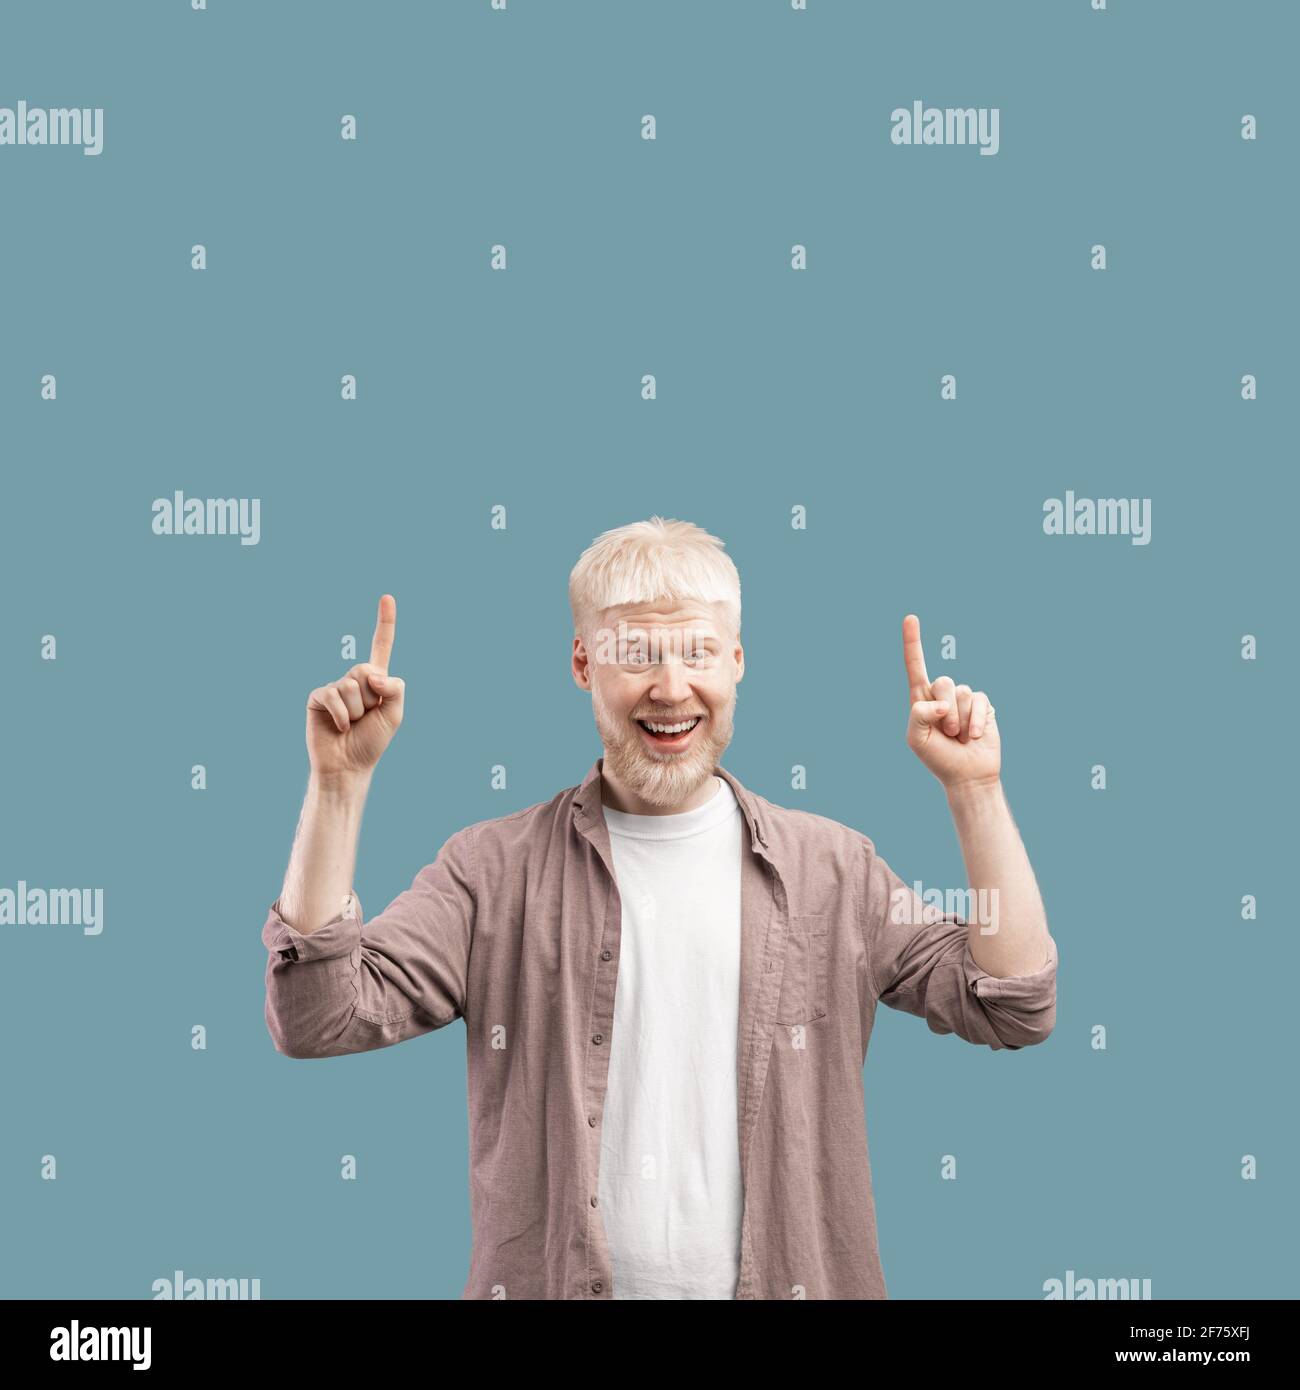 Special offer. Joyful young albino guy pointing fingers up on copy space text or product on color background Stock Photo